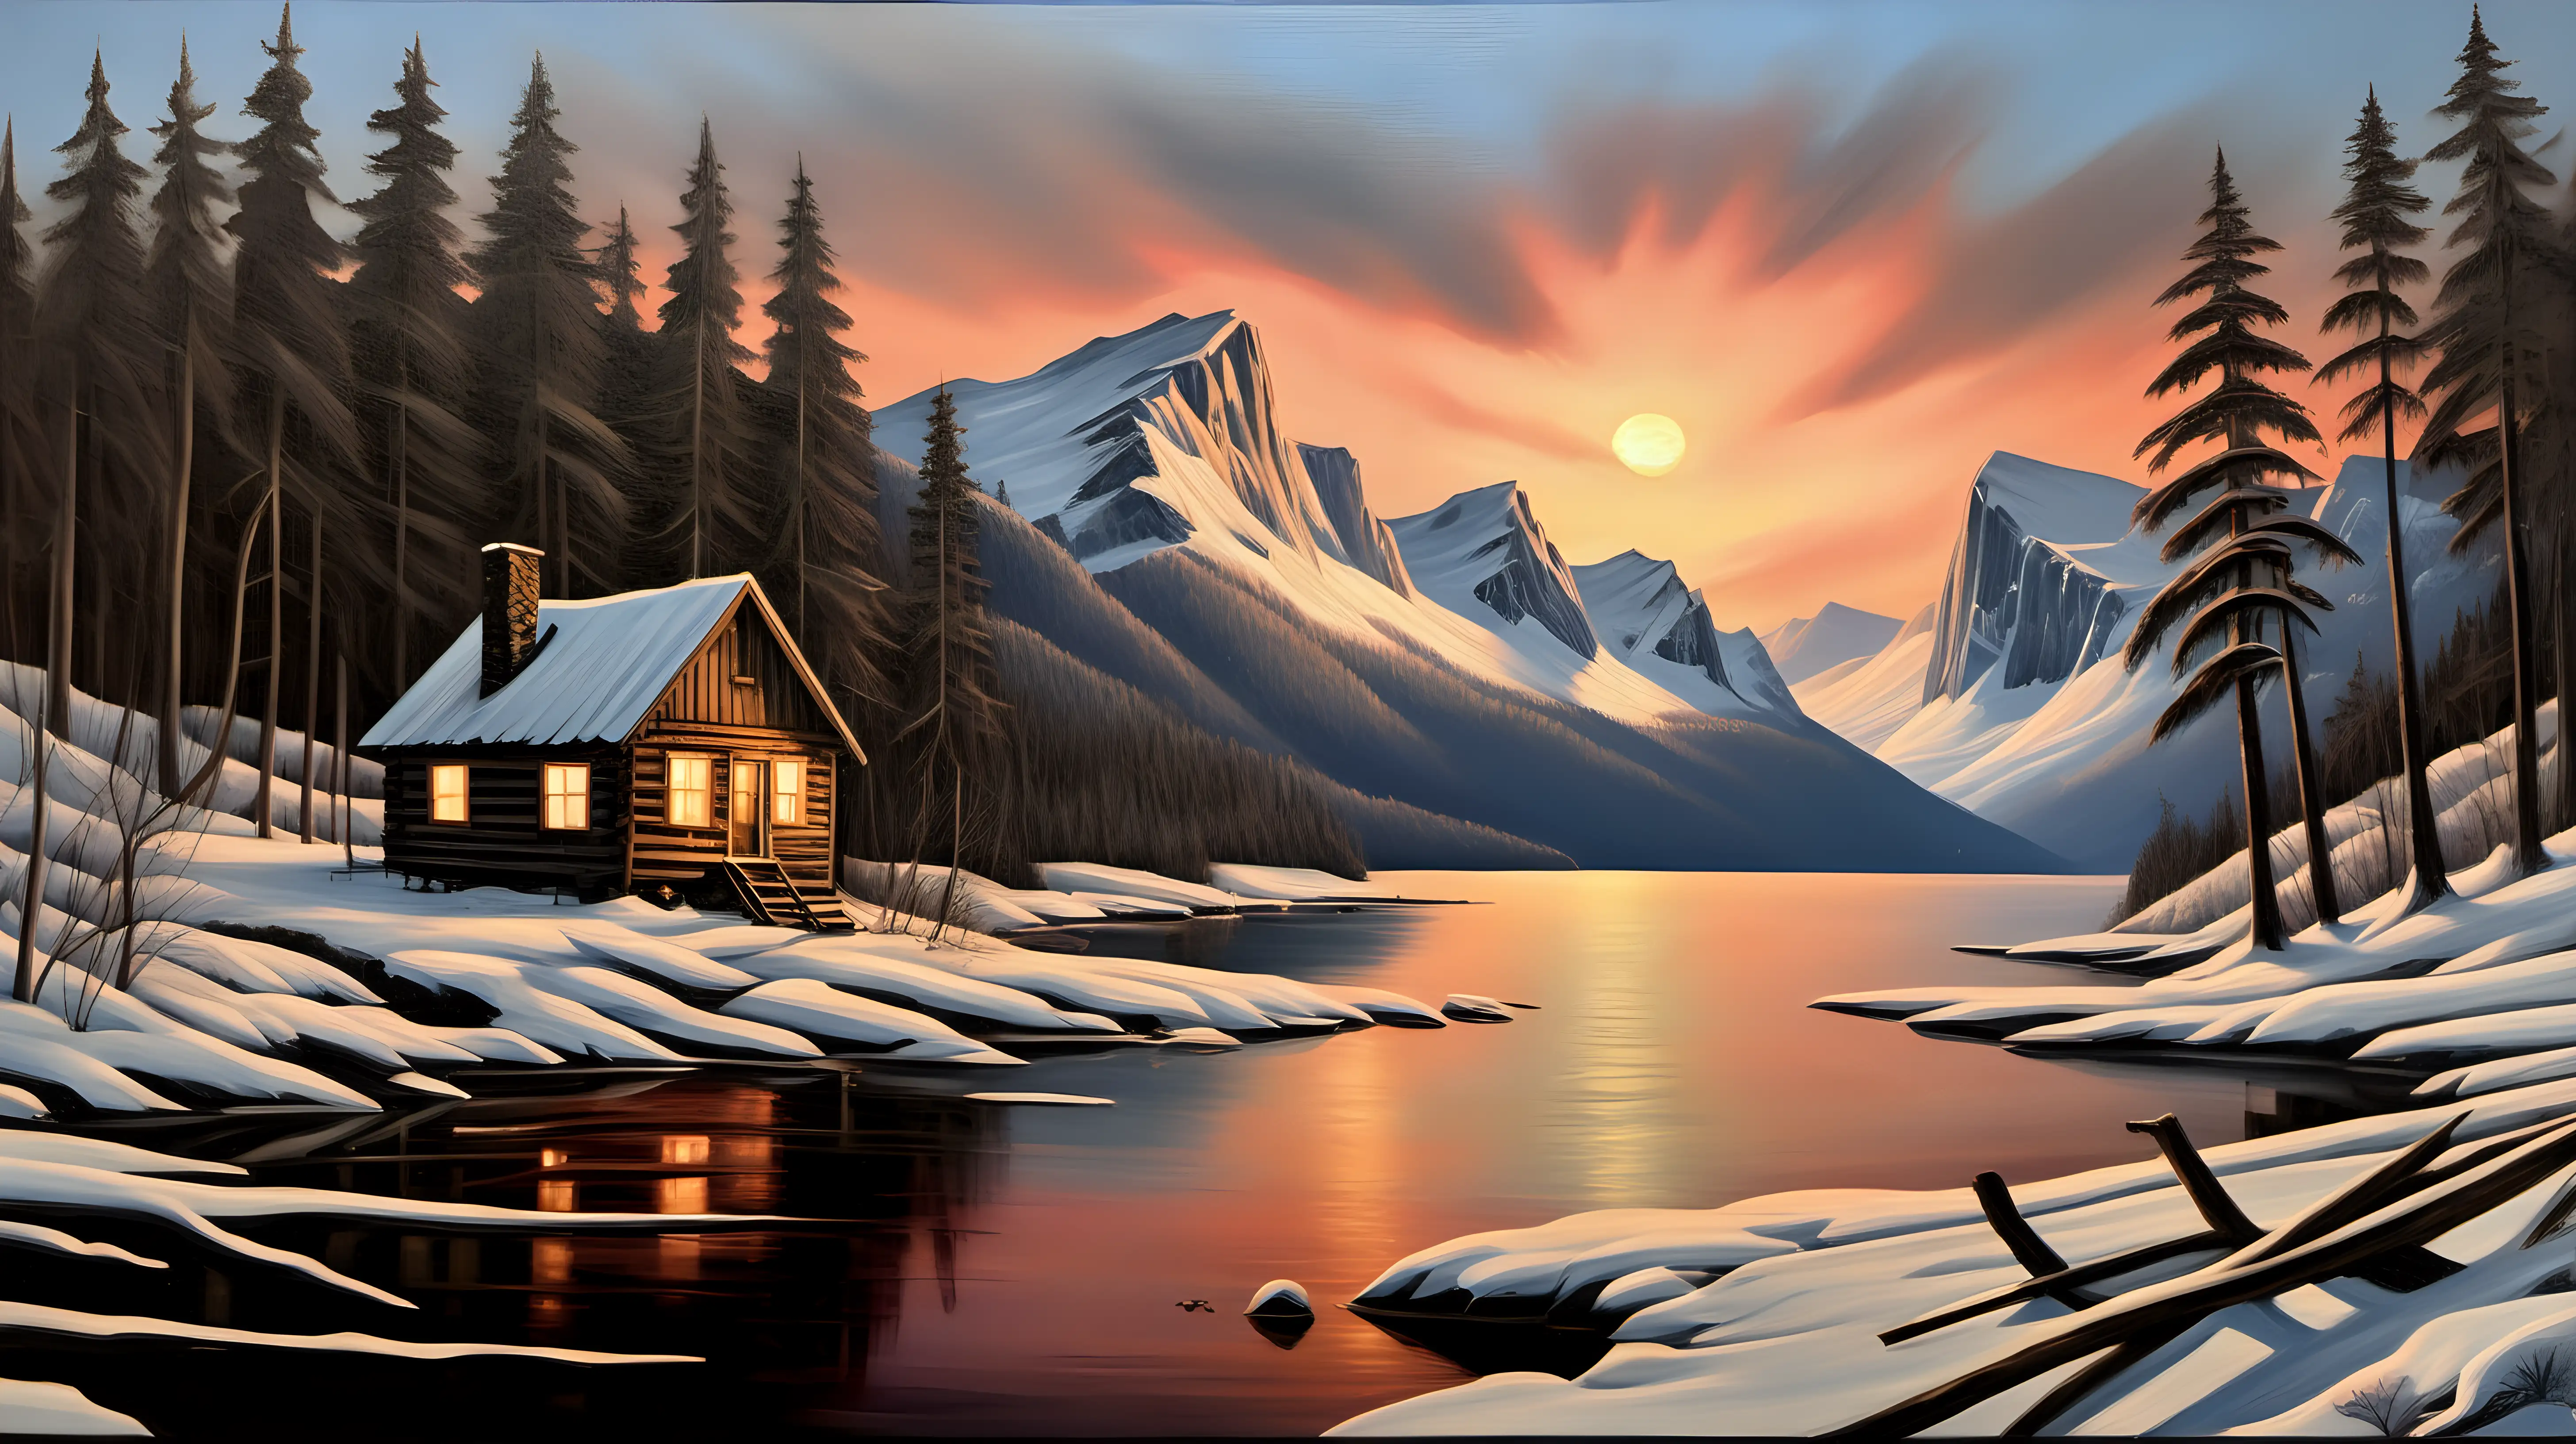 Winter Sunset at Old Cabin in Bay Snowy Woods and Mountain View